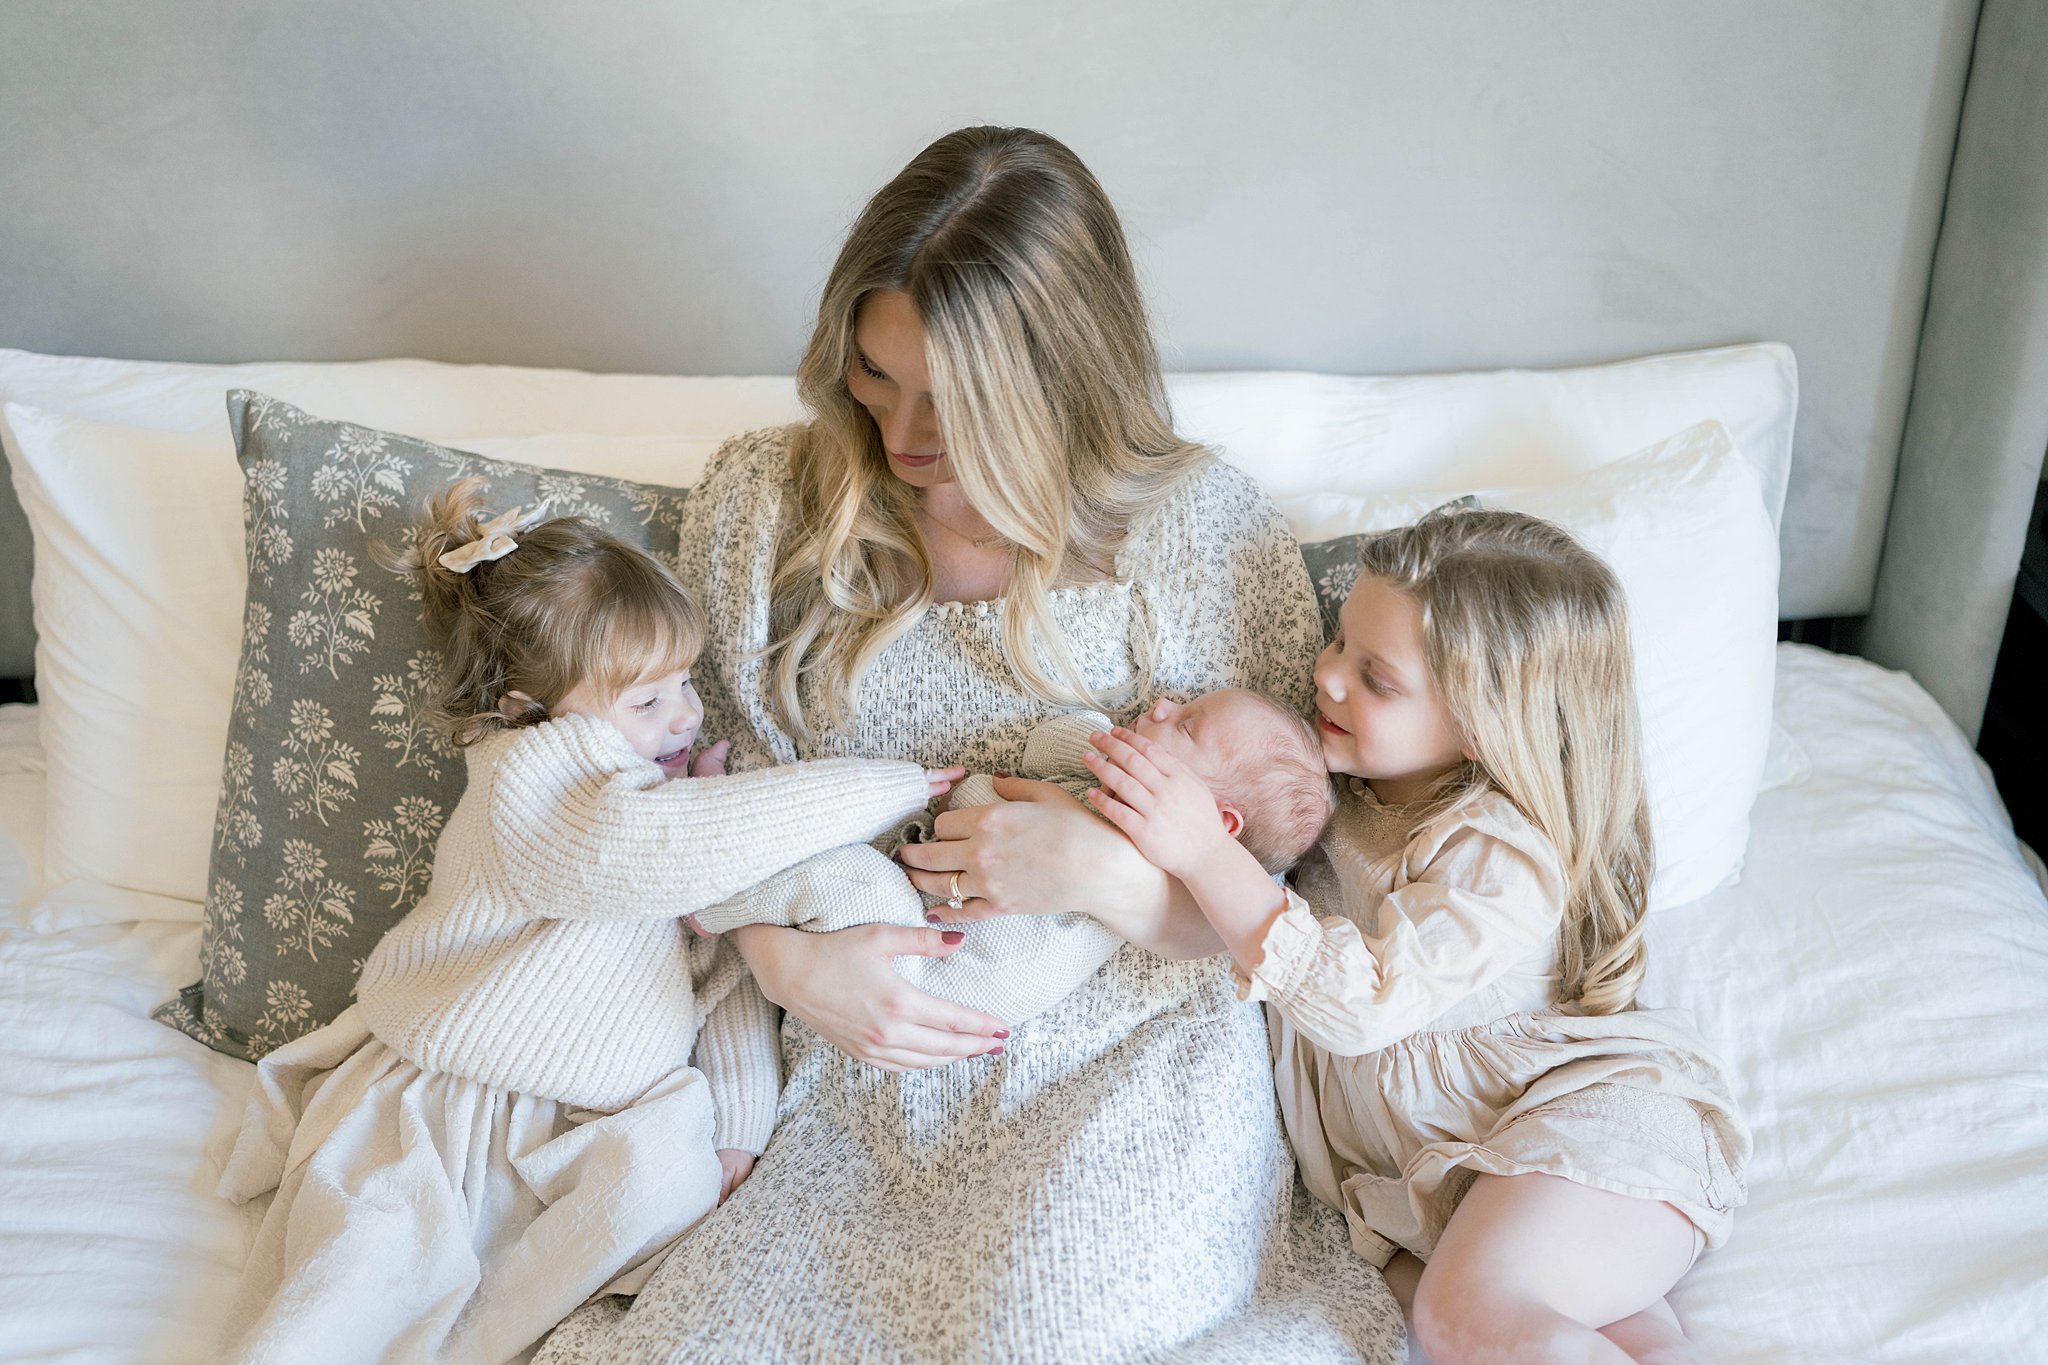 Two sisters play and gently touch their newborn sibling that is sleeping in mother's arms swaddle okc